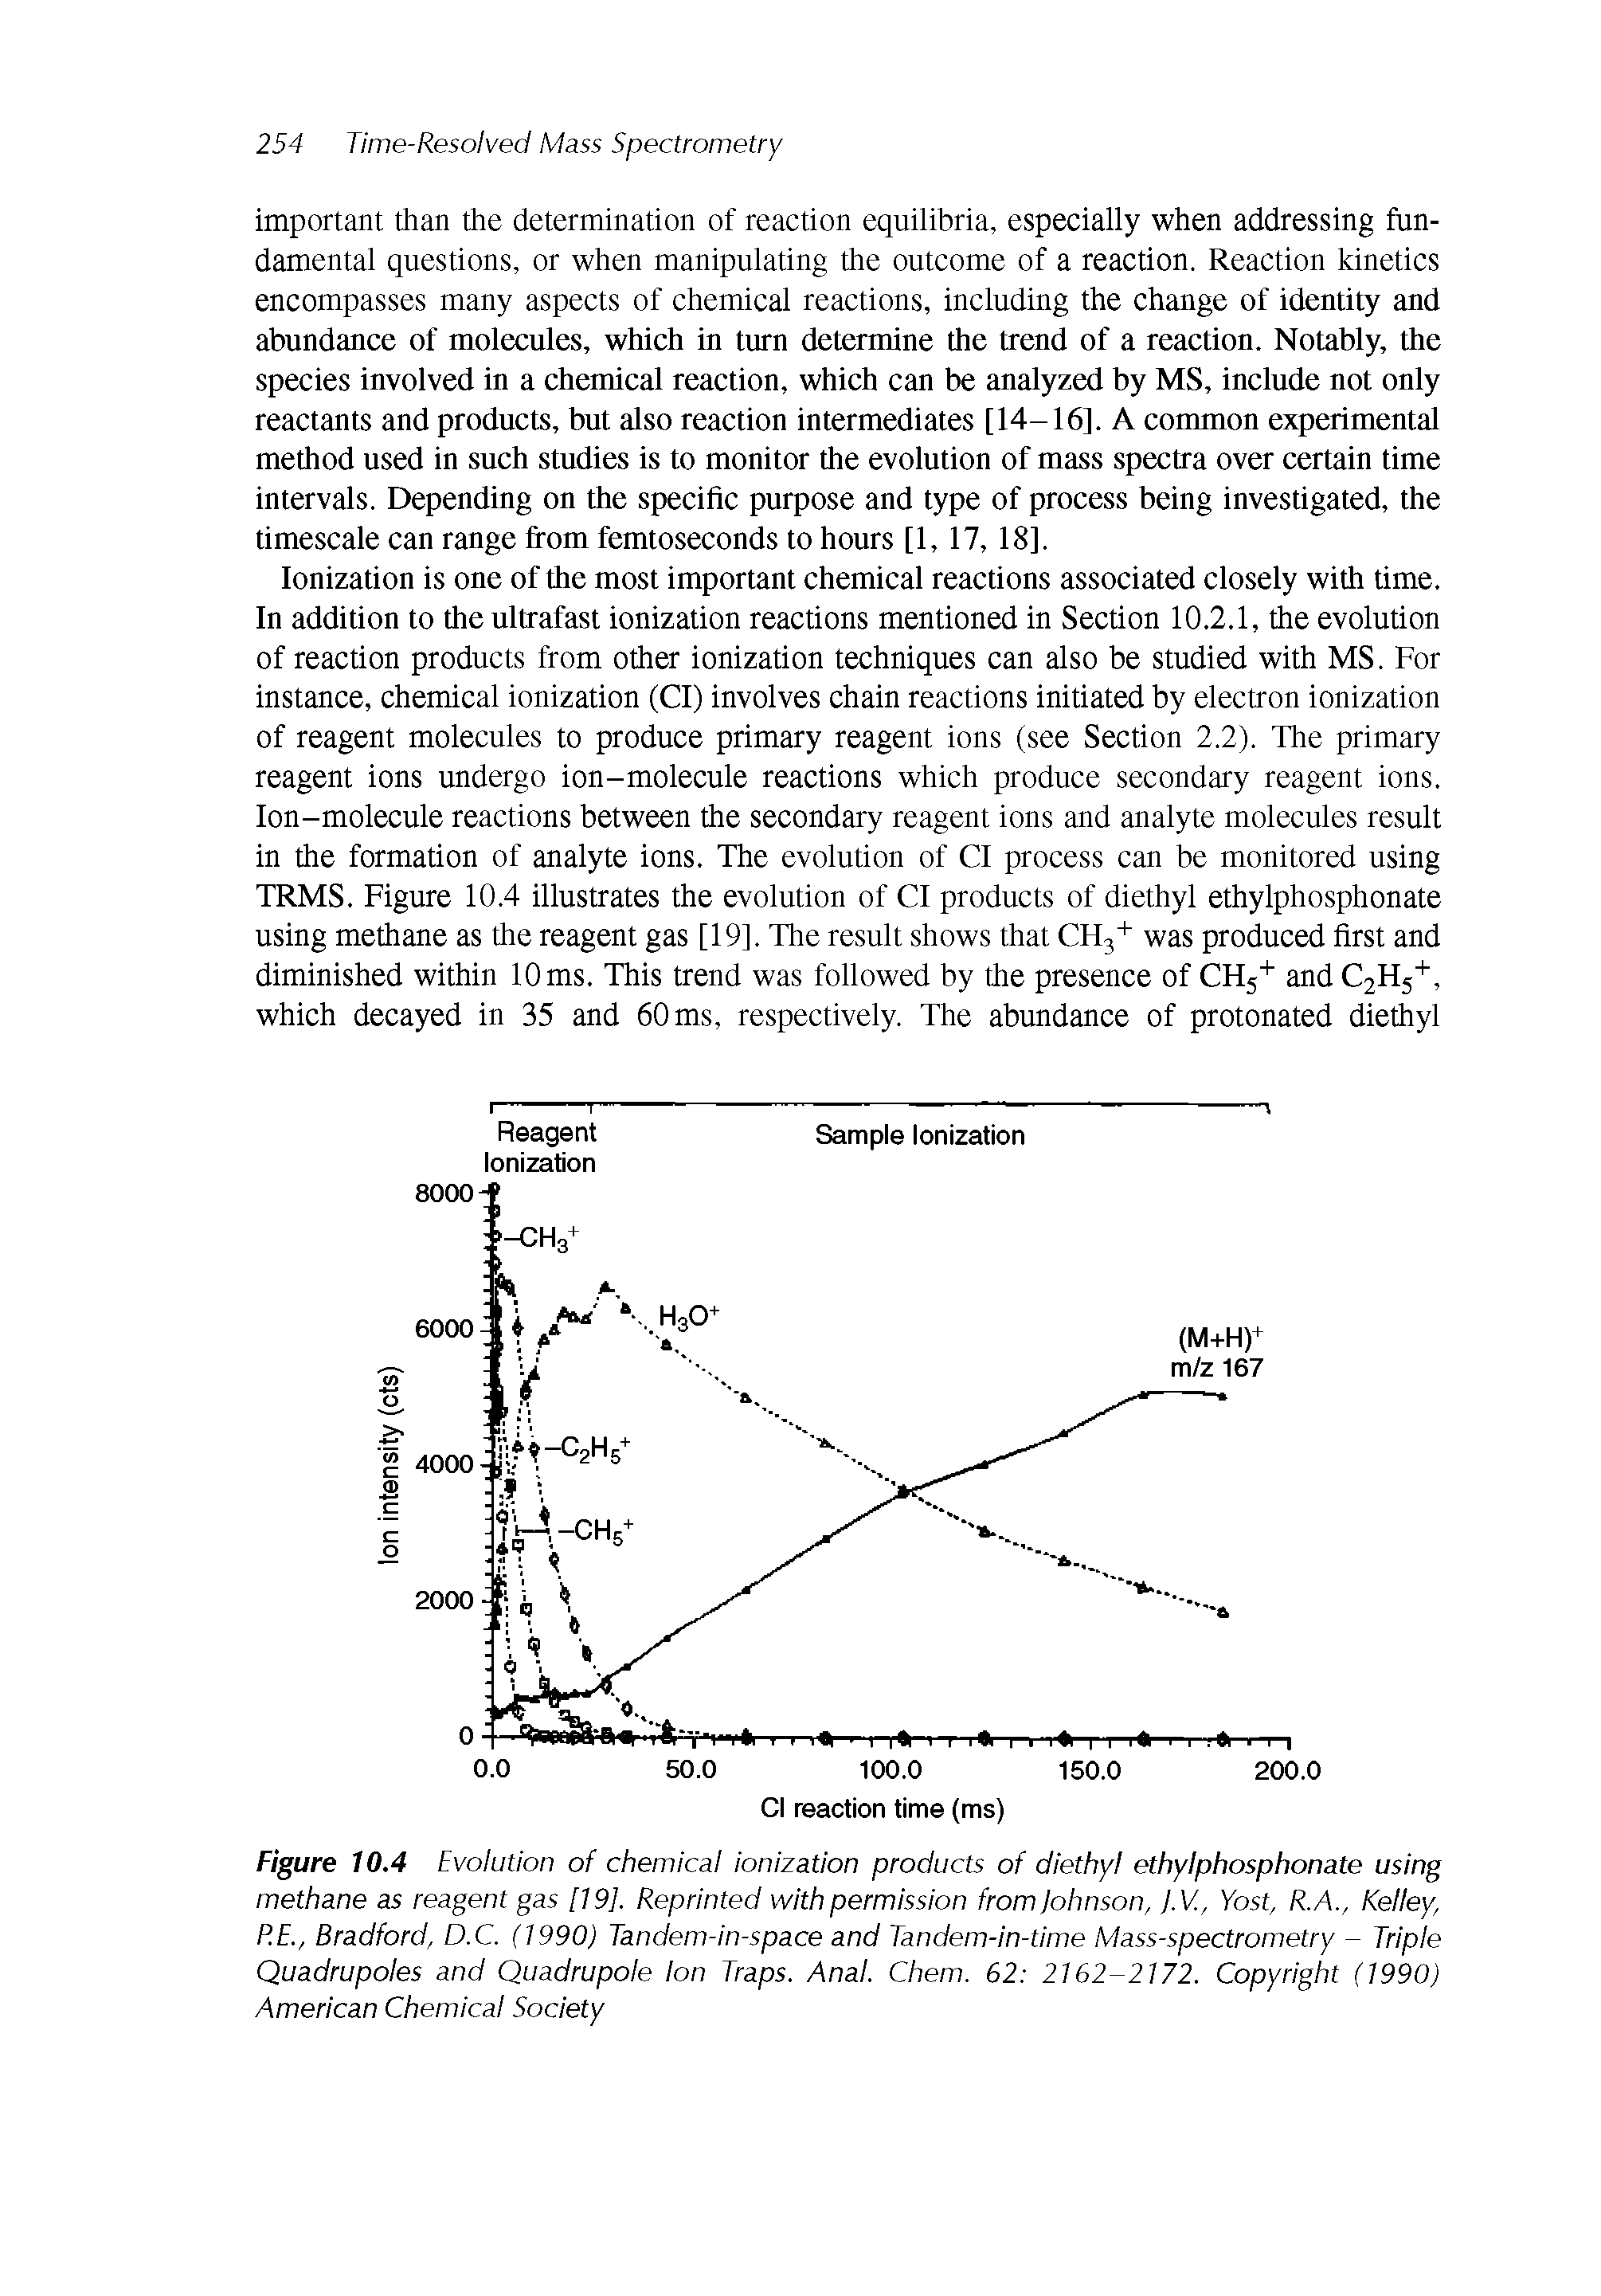 Figure 10.4 Evolution of chemical ionization products of diethyl ethylphosphonate using methane as reagent gas [19]. Reprinted with permission from Johnson, j.V, Yost, R.A., Kelley, RE., Bradford, D.C. (1990) Tandem-in-space and Tandem-in-time Mass-spectrometry - Triple Quadrupoles and Quadrupole Ion Traps. Anal. Chem. 62 2162-2172. Copyright (1990) American Chemical Society...